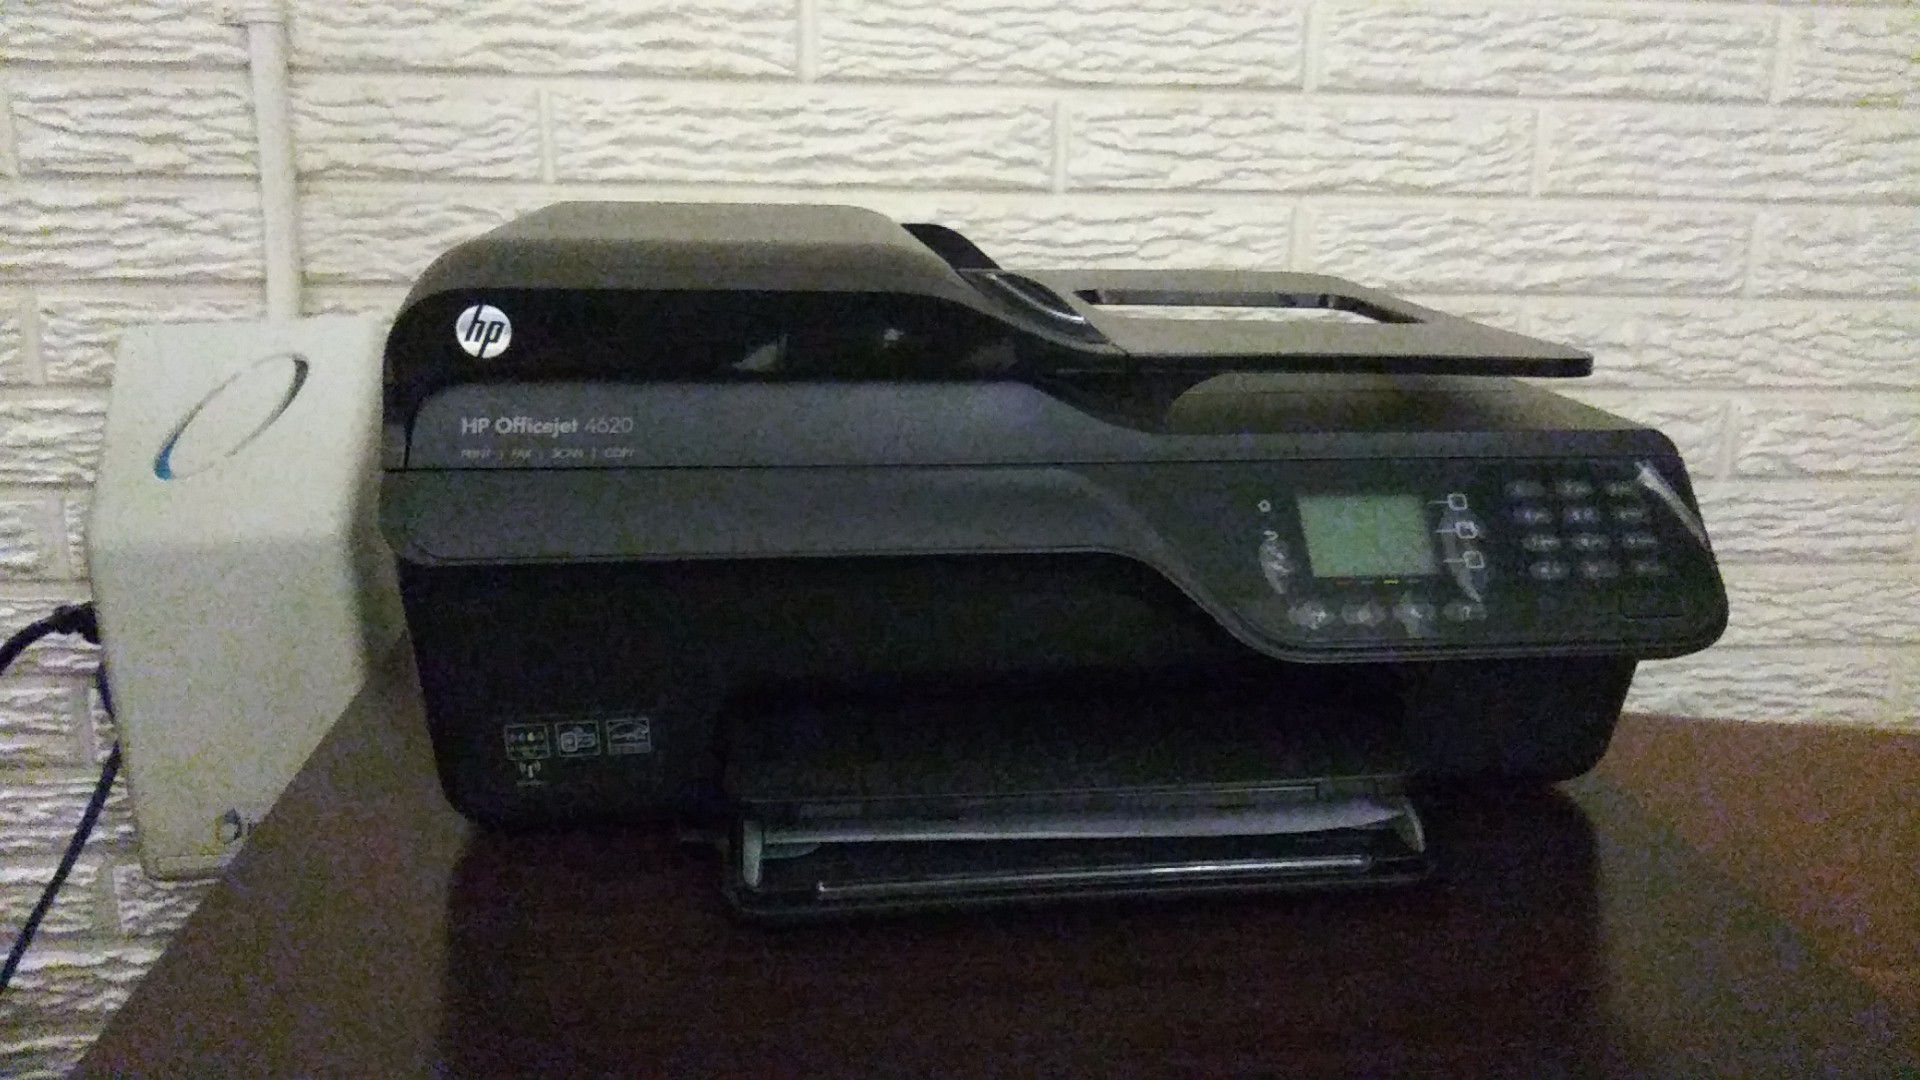 HP office jet 4620 color printer with wifi, fax and scanner.